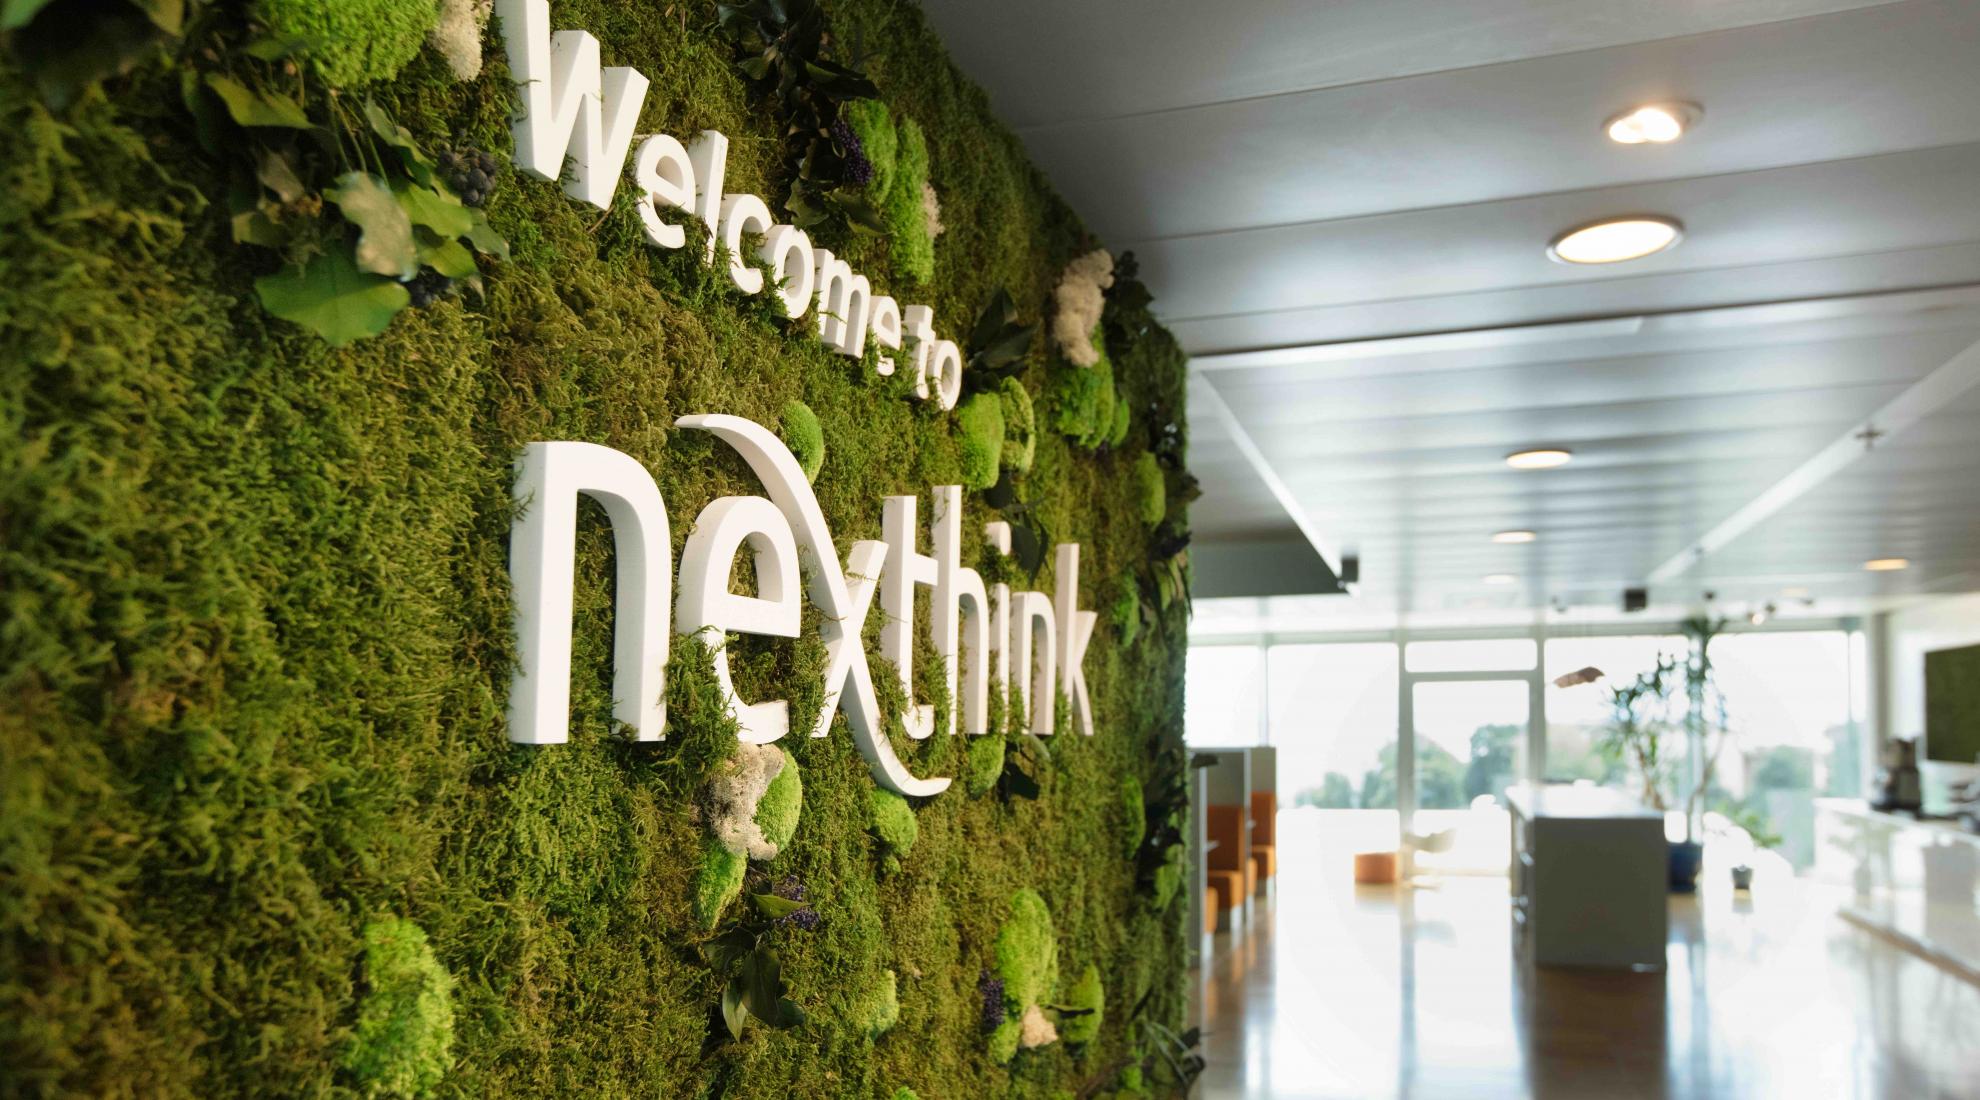 Nexthink office in Lausanne